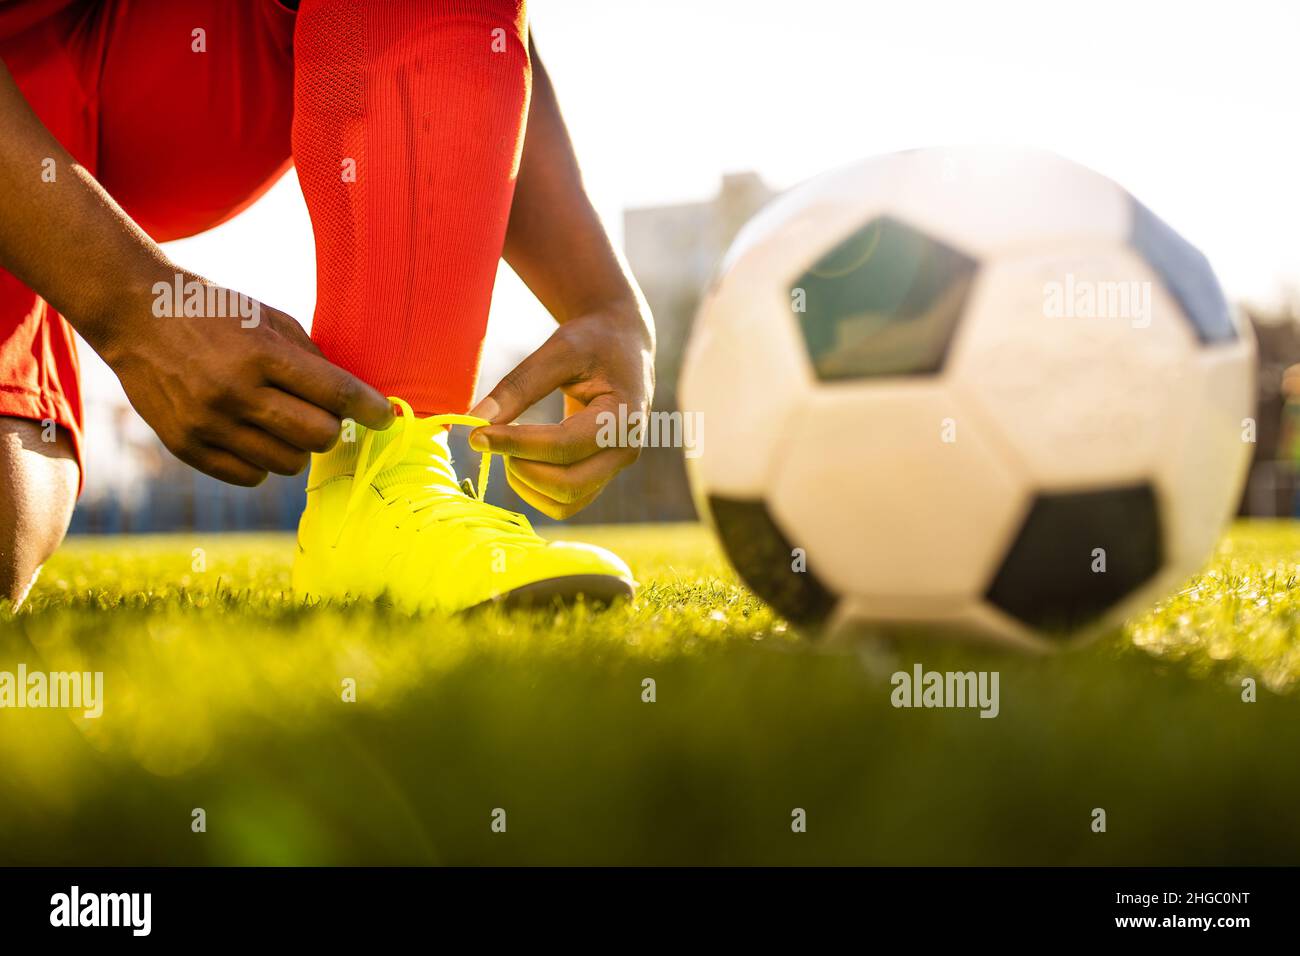 authentic happy football trainer working out outdoor in summer great day Stock Photo